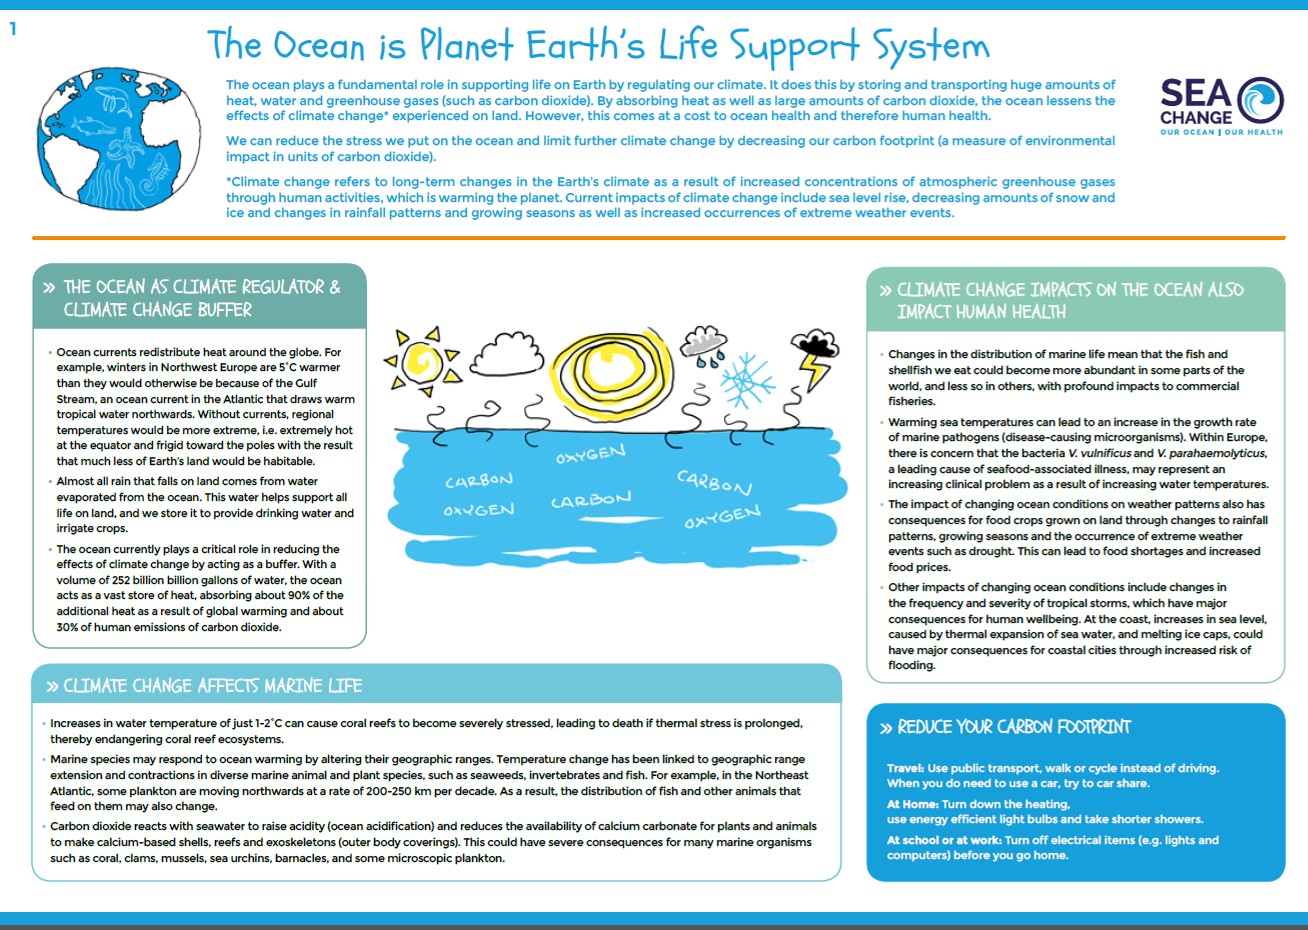 why are oceans important to life on earth